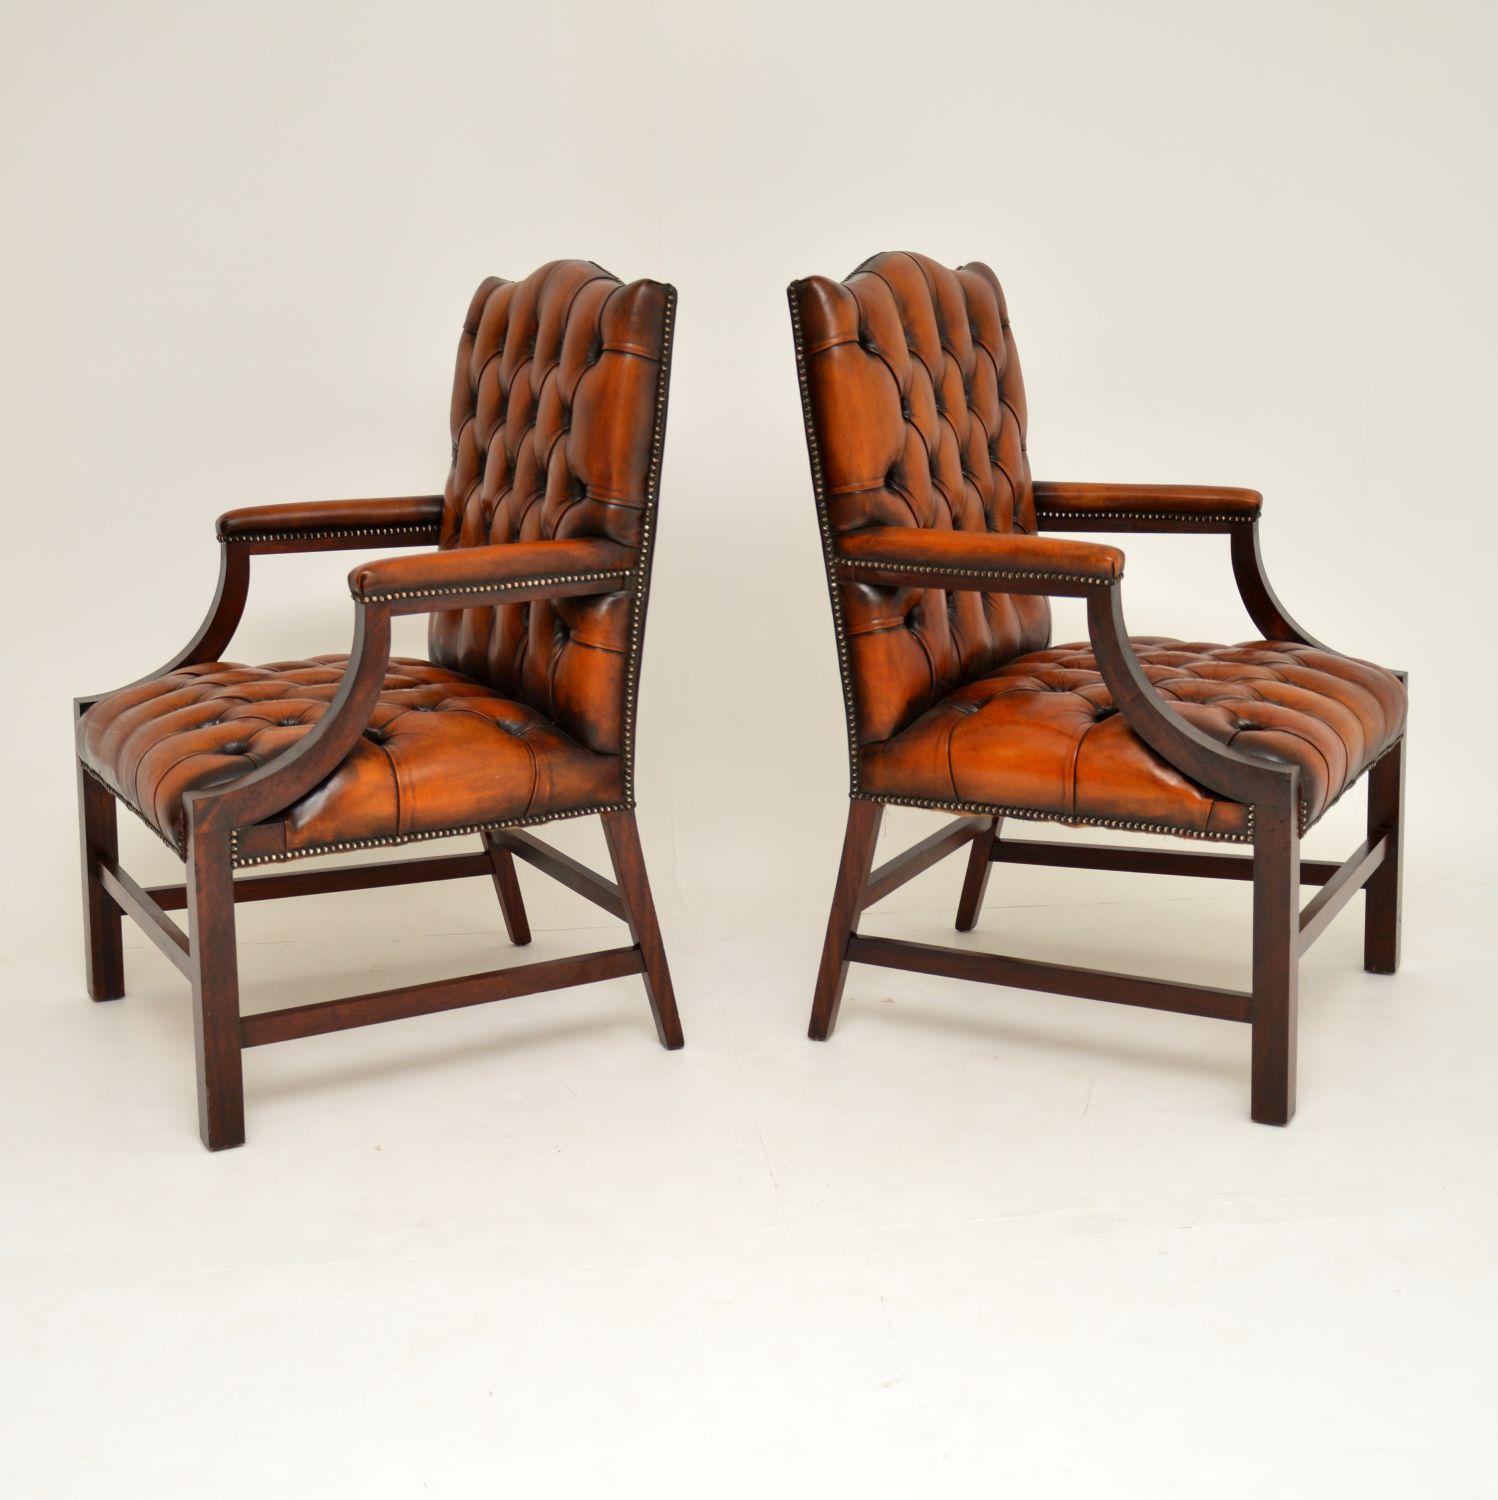 Chippendale Pair of Antique Leather and Mahogany Gainsborough Armchairs